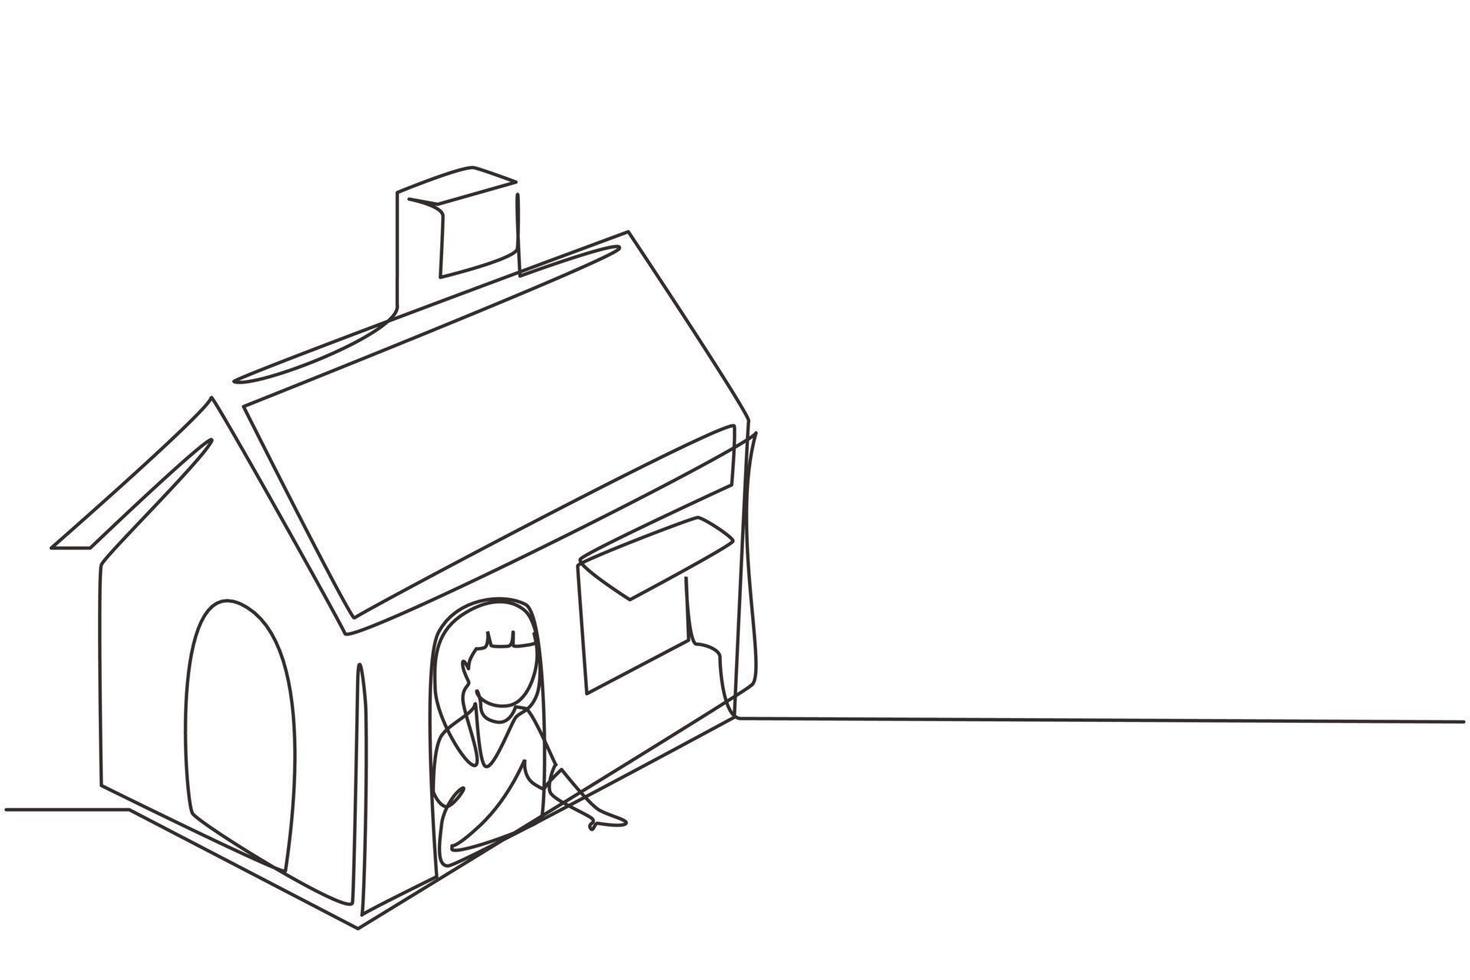 Single continuous line drawing cute little girl playing in house made of cardboard boxes. Creative child sitting in playhouse. Leisure time. Dynamic one line draw graphic design vector illustration